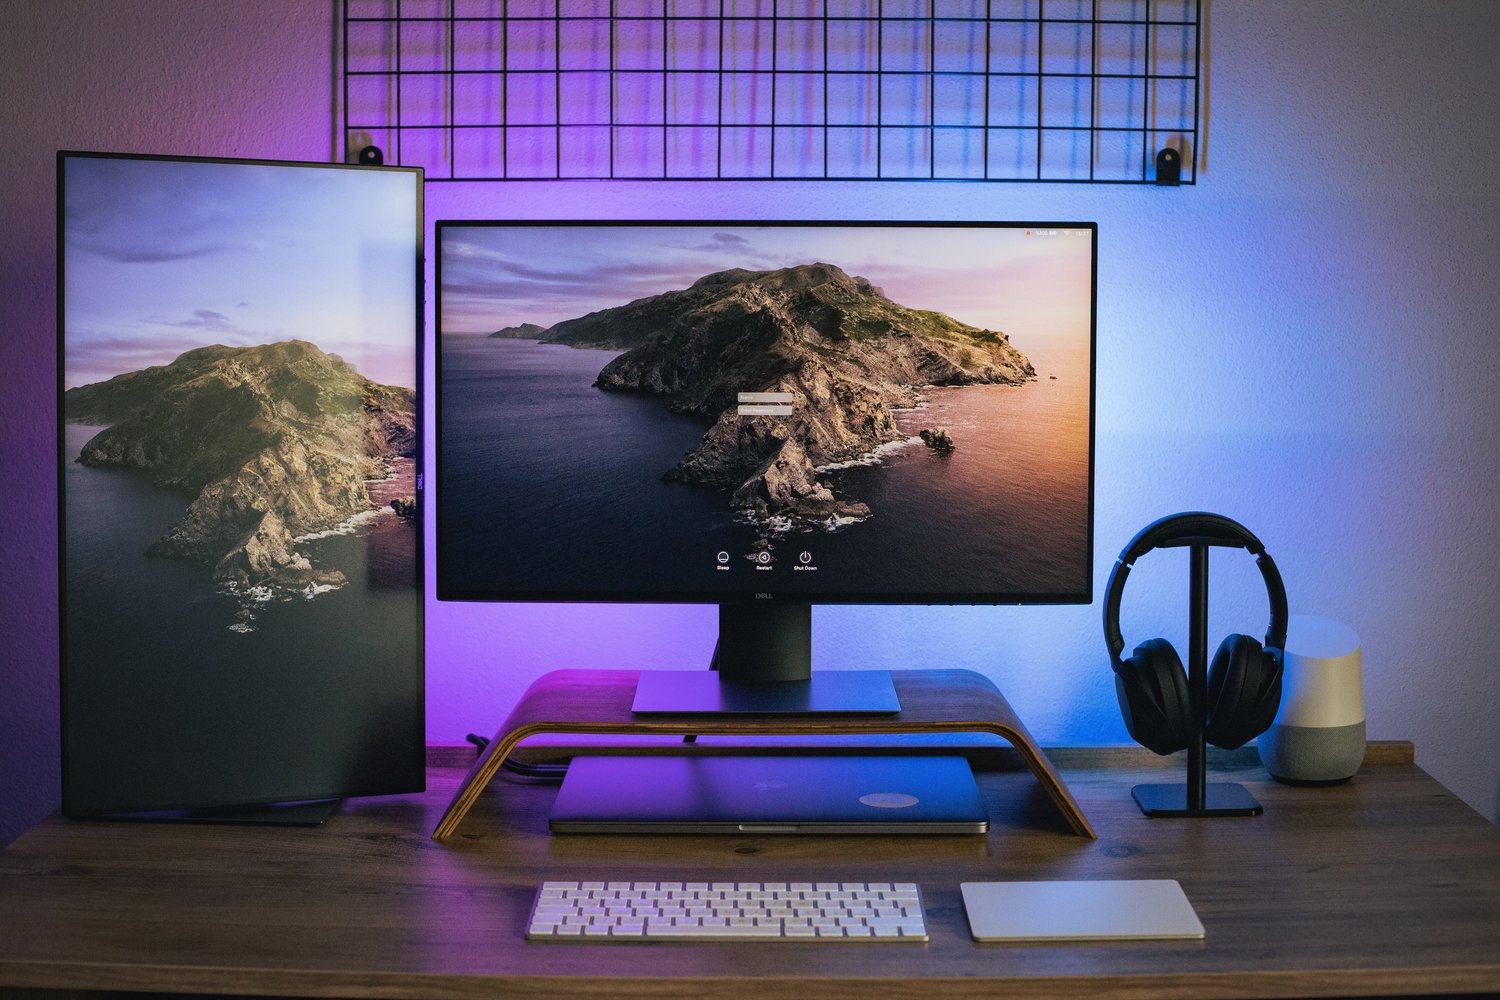 How To Set Up A Second Monitor With HDMI